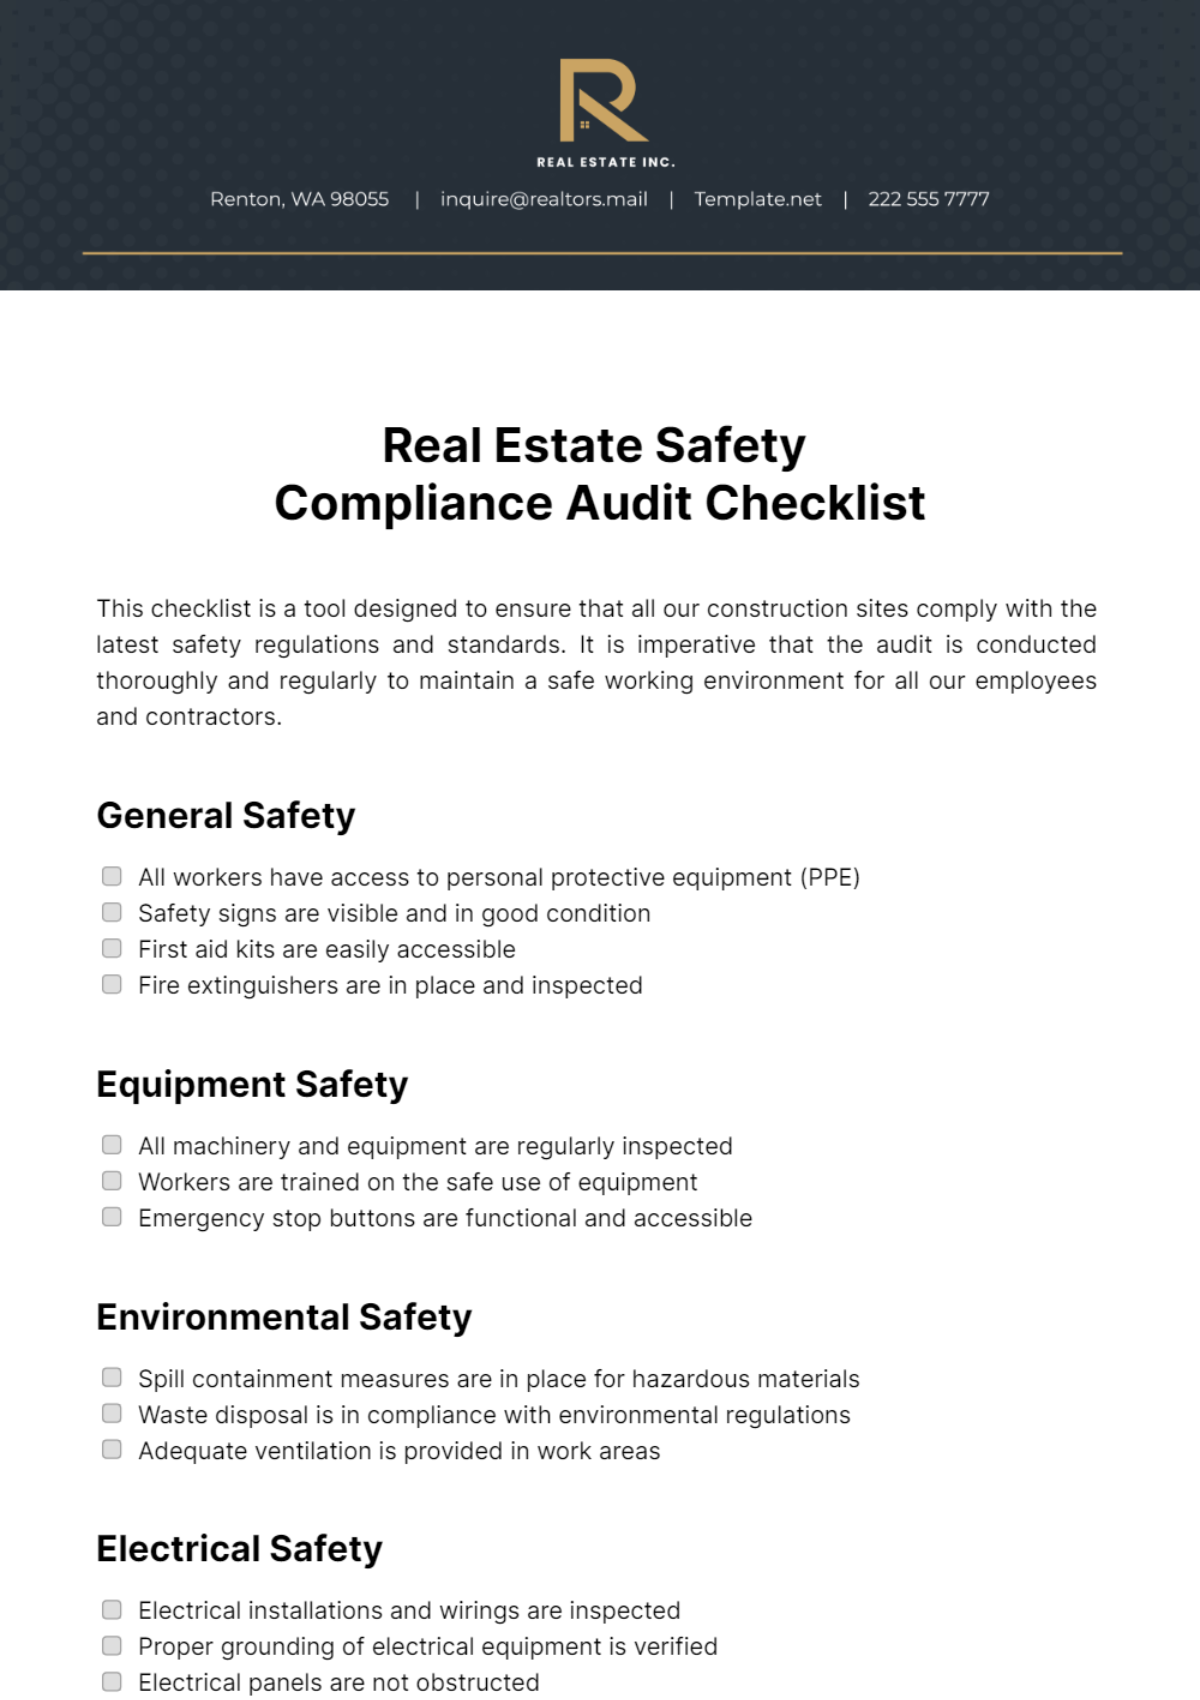 Real Estate Safety Compliance Audit Checklist Template